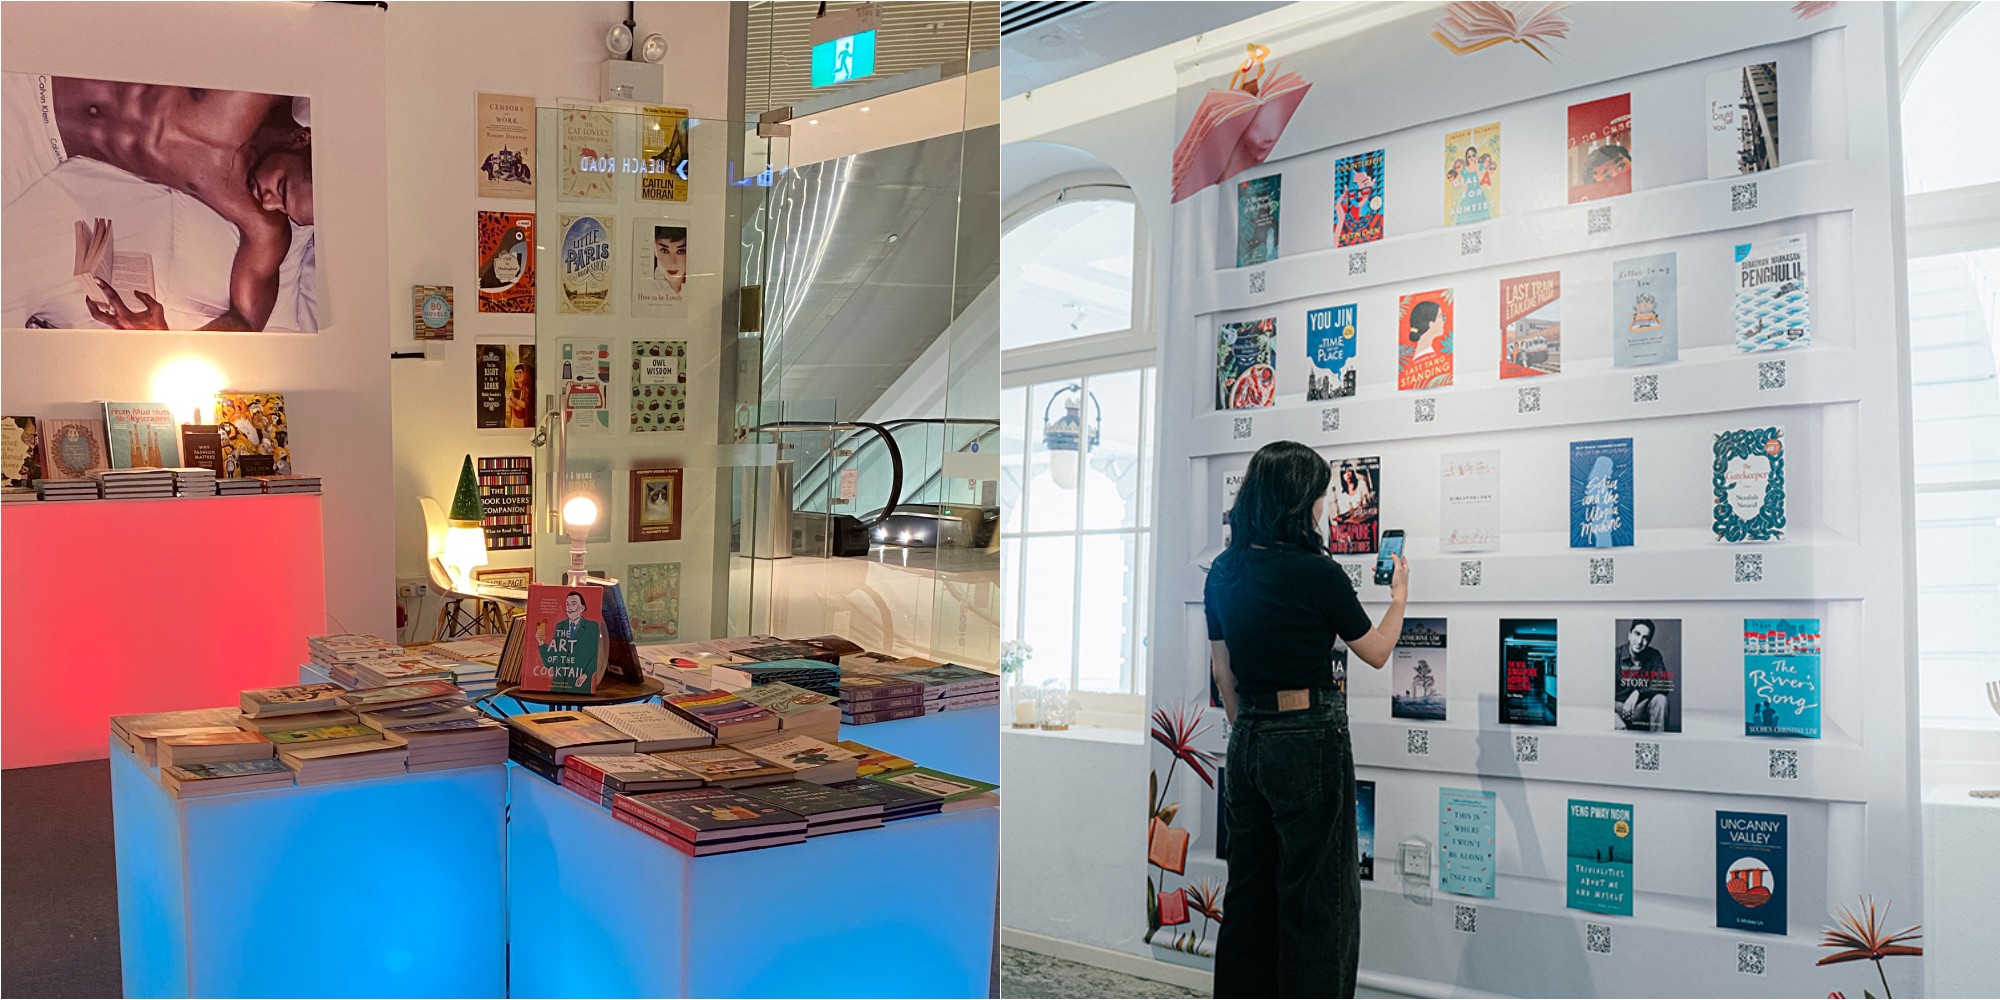 Collage of the Pop-up Bookstore and someone interacting with Read At Home’s QR code wall